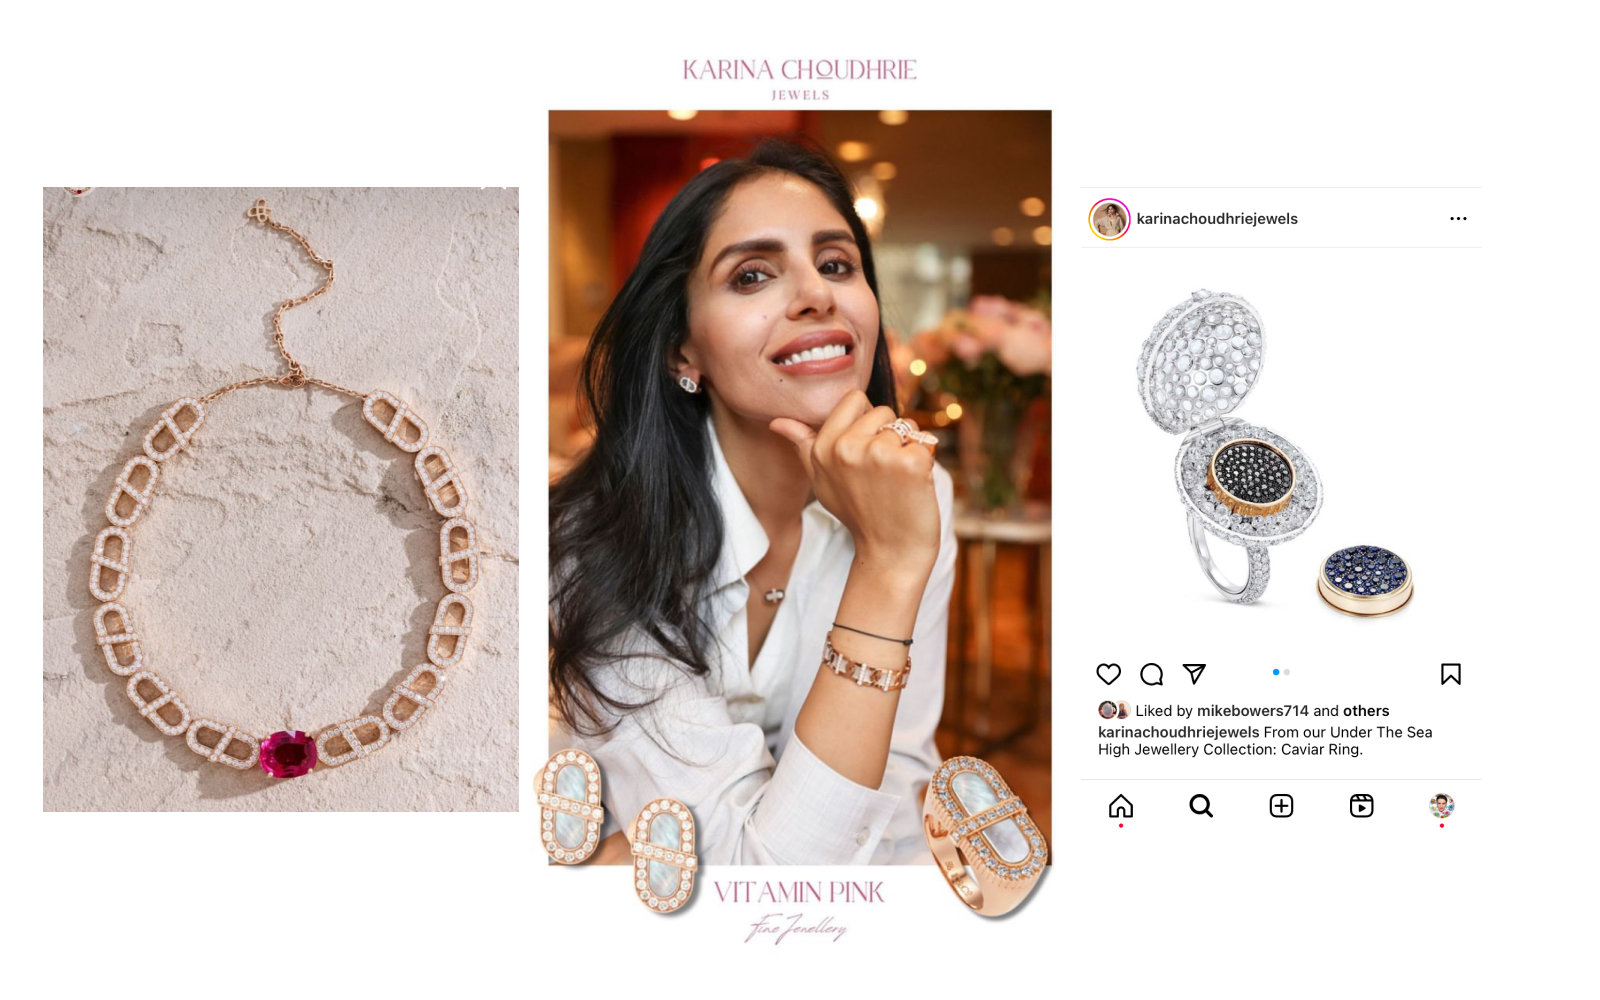 Designer Karina Choudhrie sourrounded by her creations including pieces from her Vitamin Pink collection in rose gold, mother-of-pearl, rubellite and diamond and her Under the Sea Caviar ring in gold, white gold, diamond and sapphire